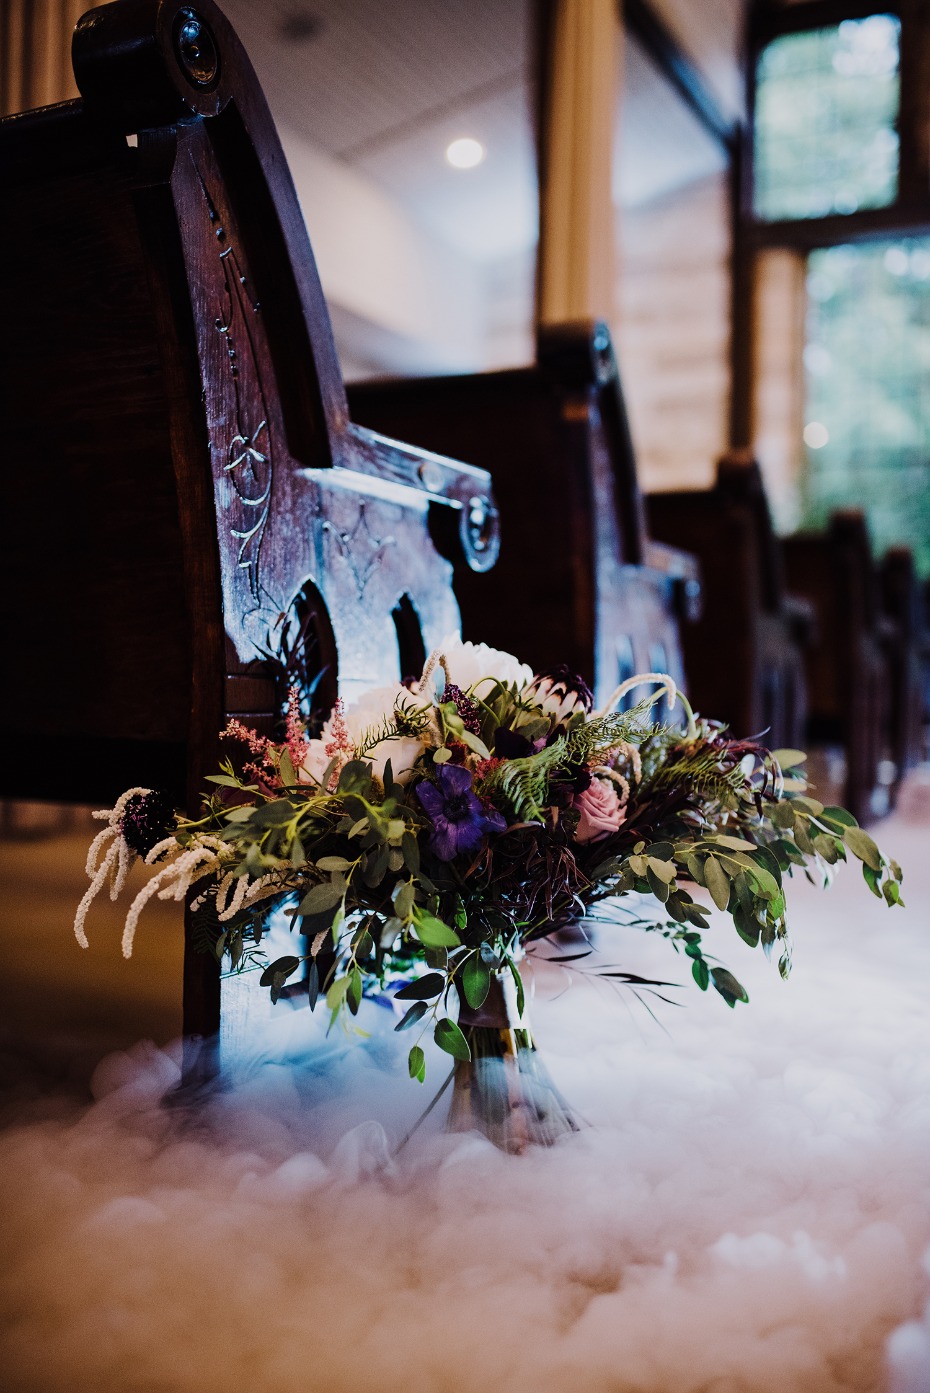 Have a fog machine for your ceremony